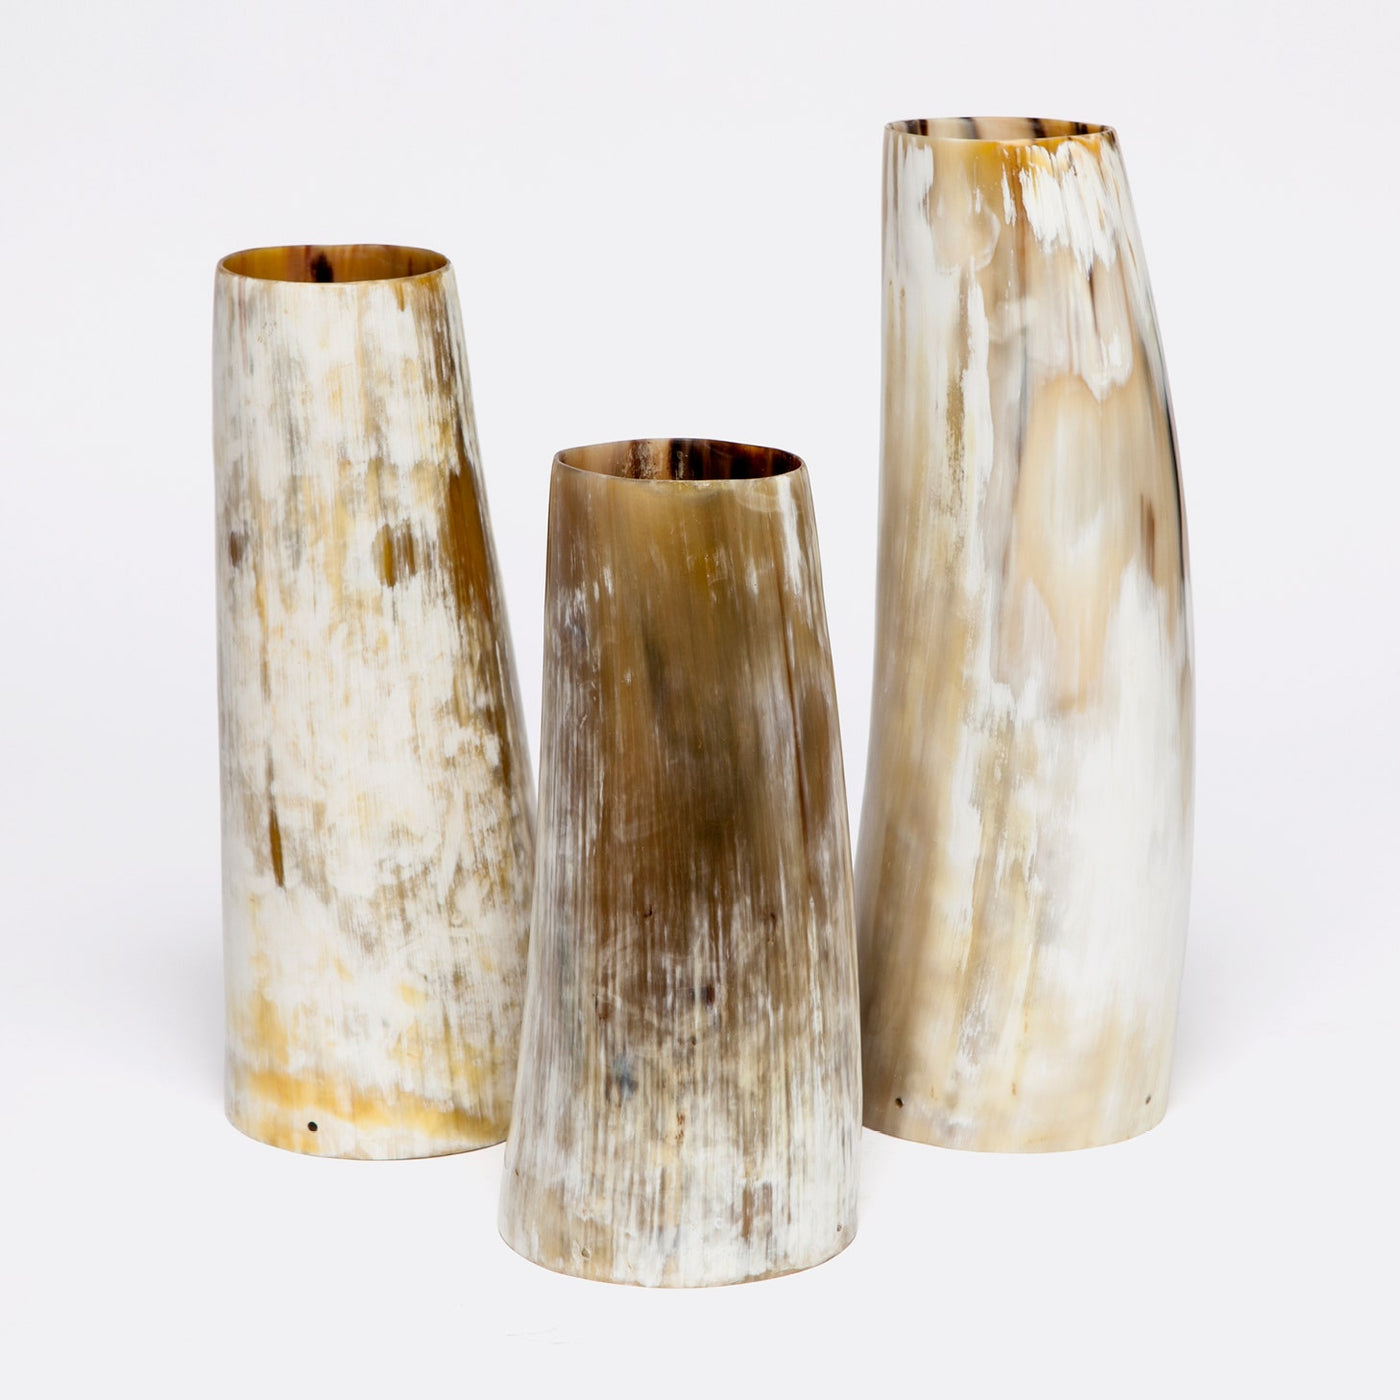 VASE NATURAL HORN (Available in 3 Sizes)